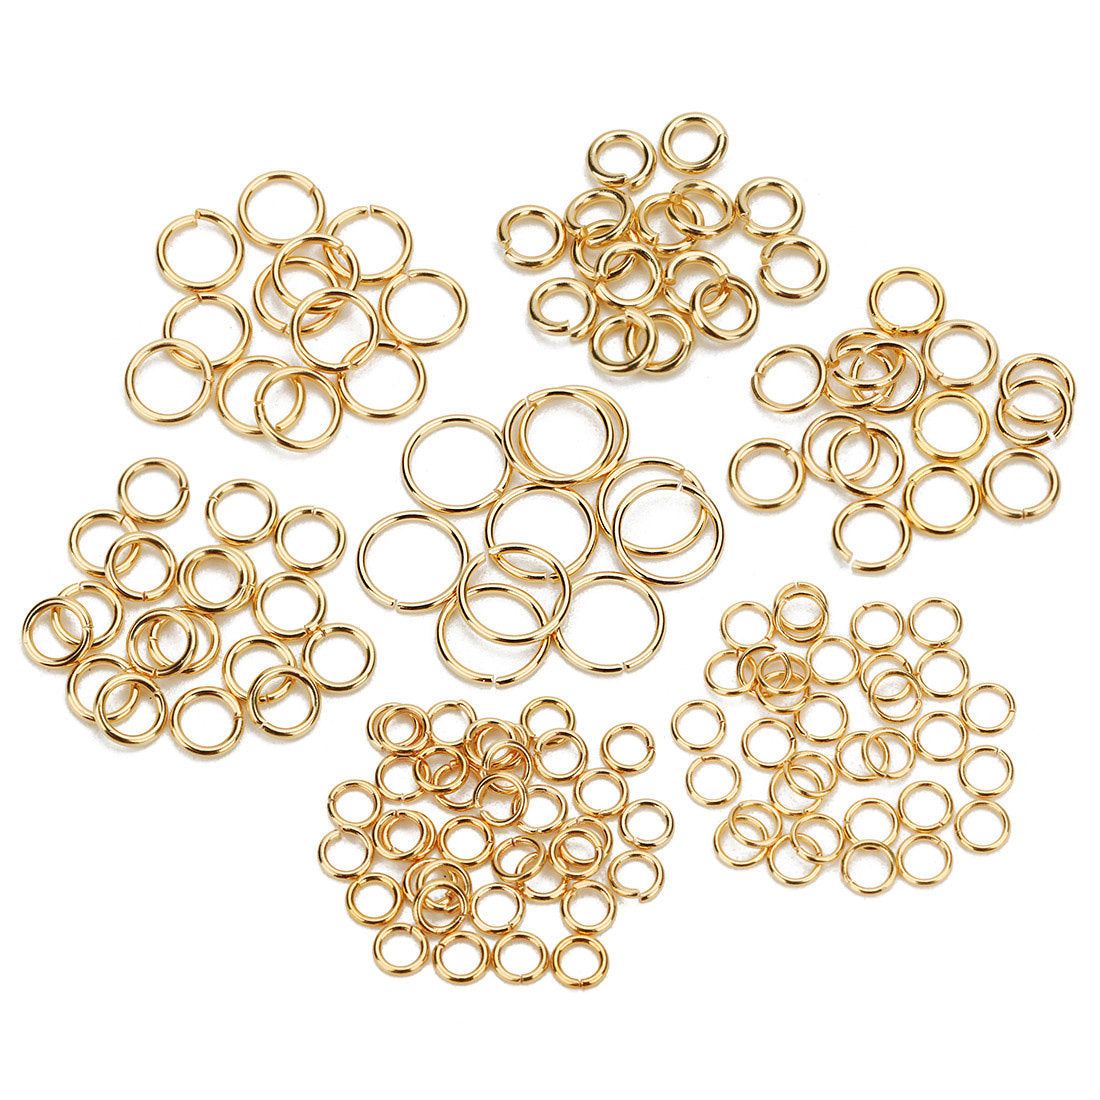 ALL in ONE 1000pcs Open Jump Rings Jewelry Making (Gold 8mm)